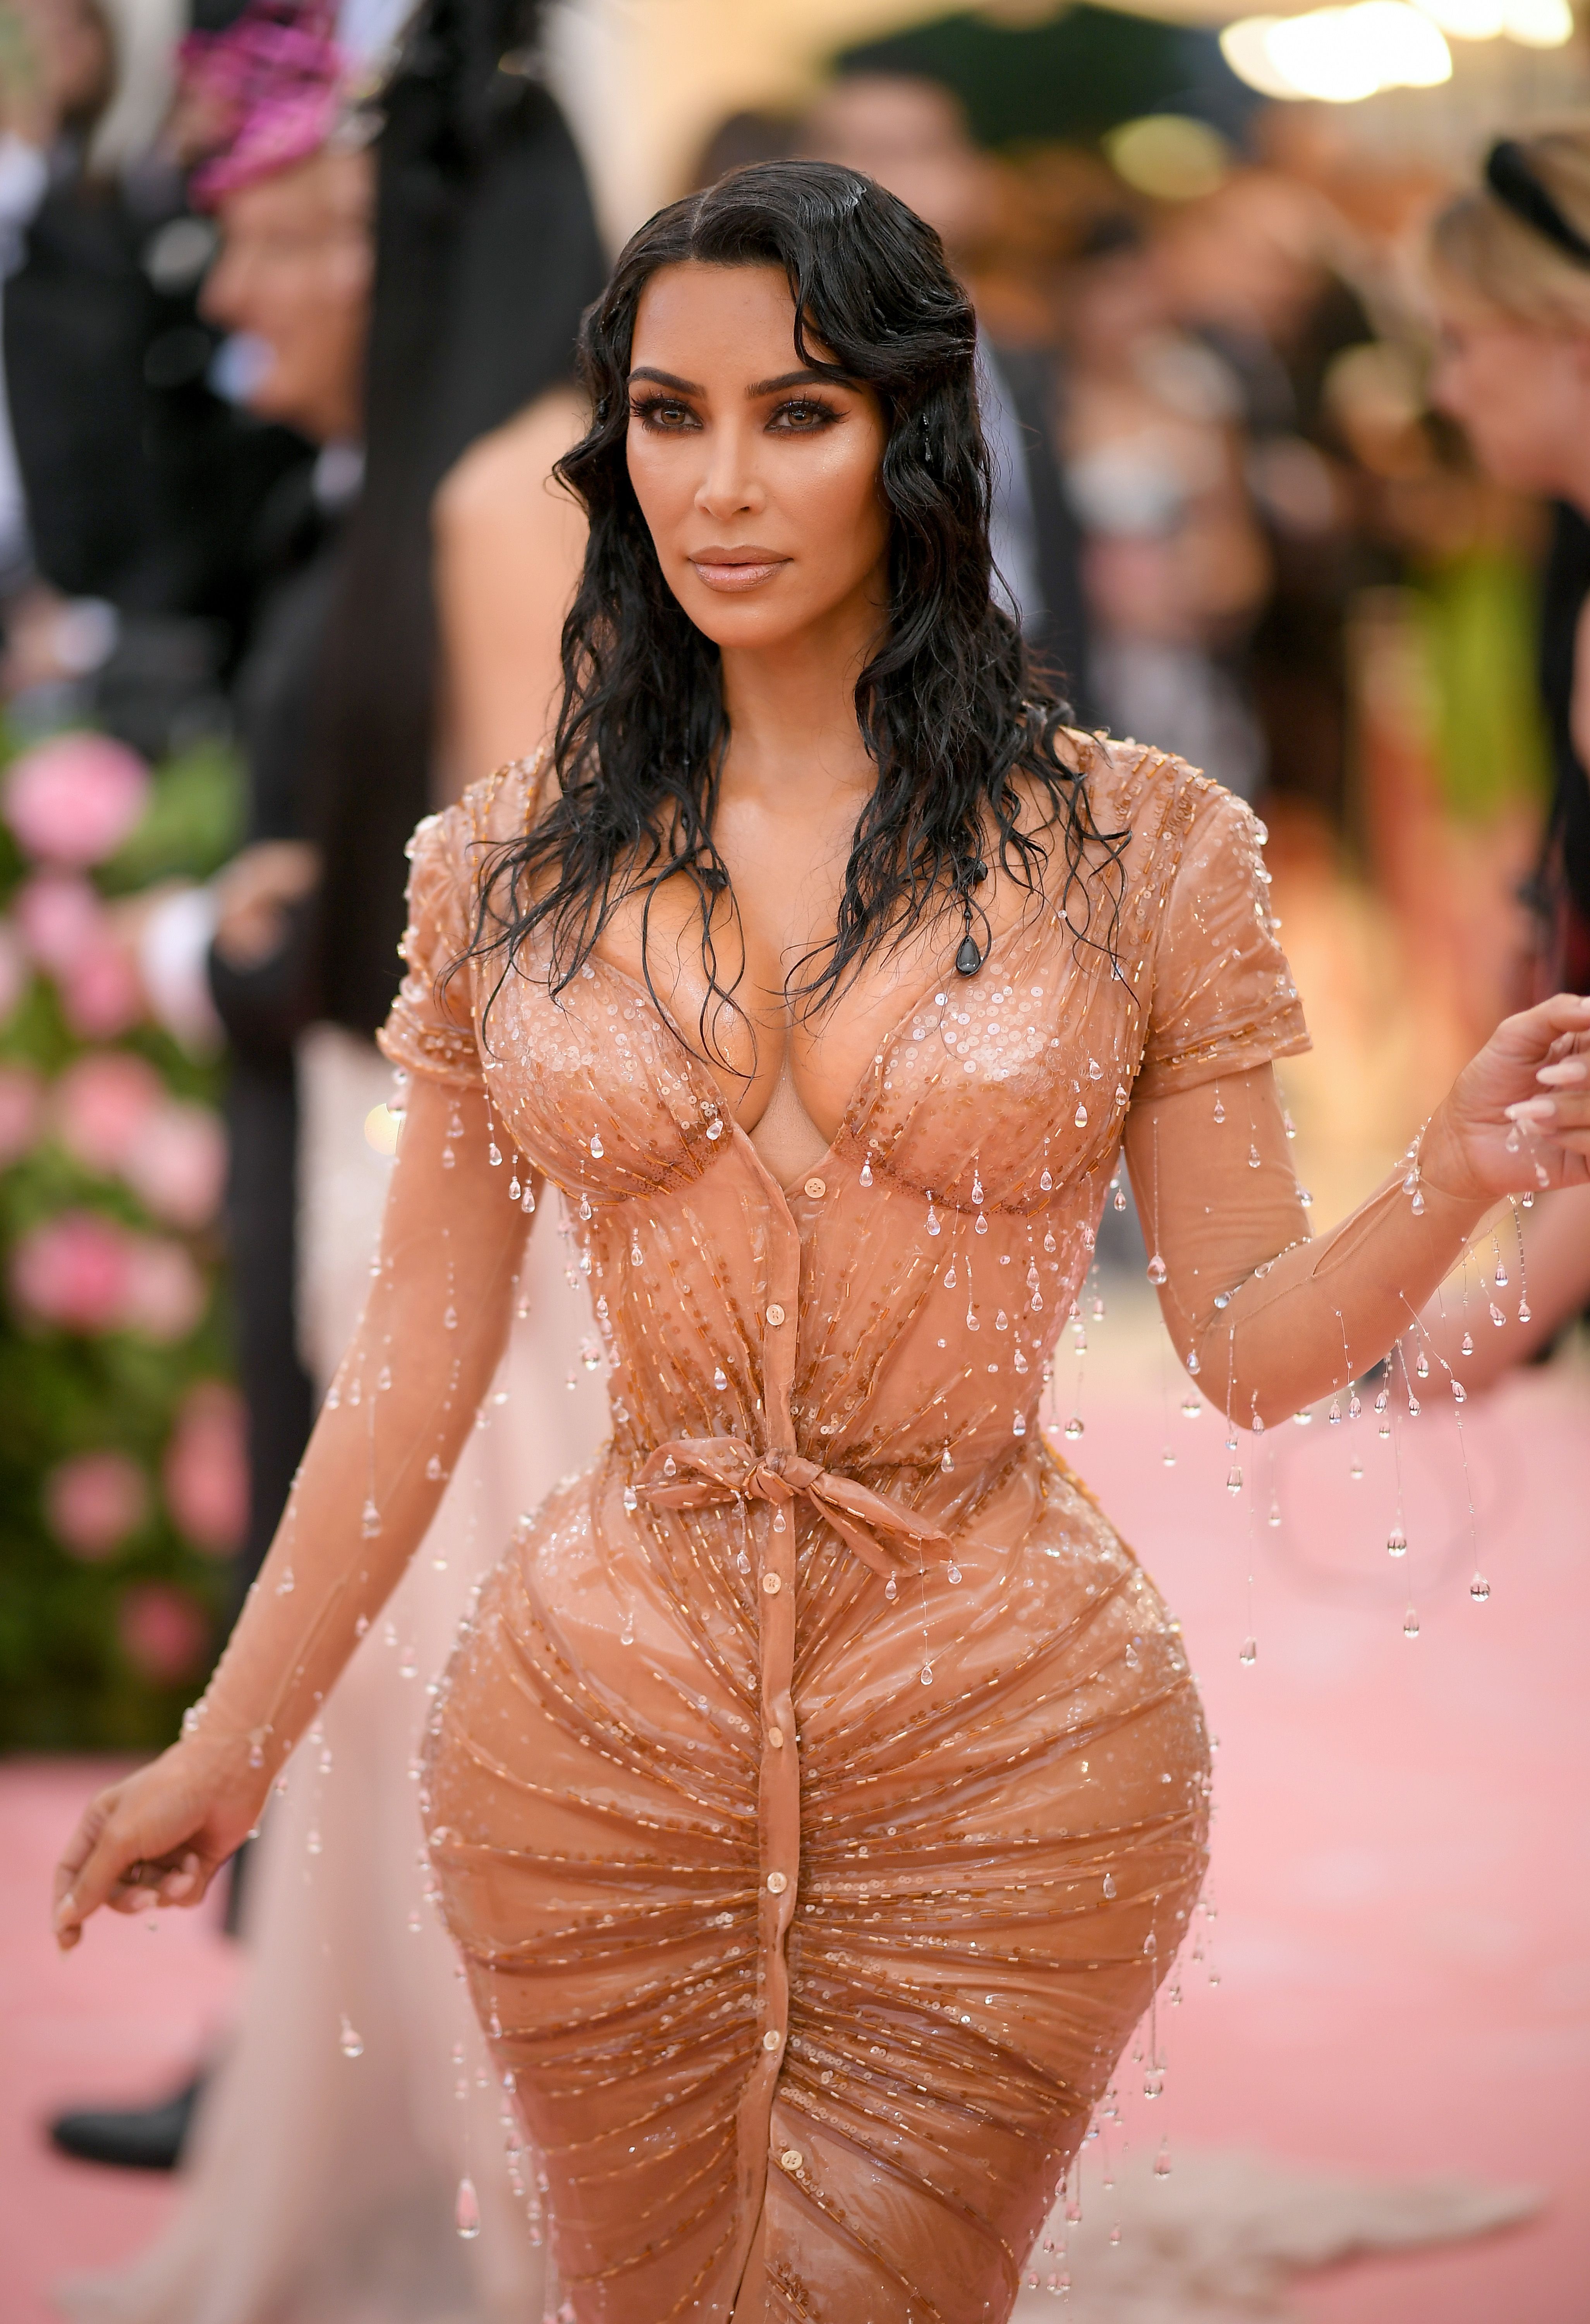 Kim Kardashian West Says She Has Empathy For Britney Spears And Opens Up About Media Shaming